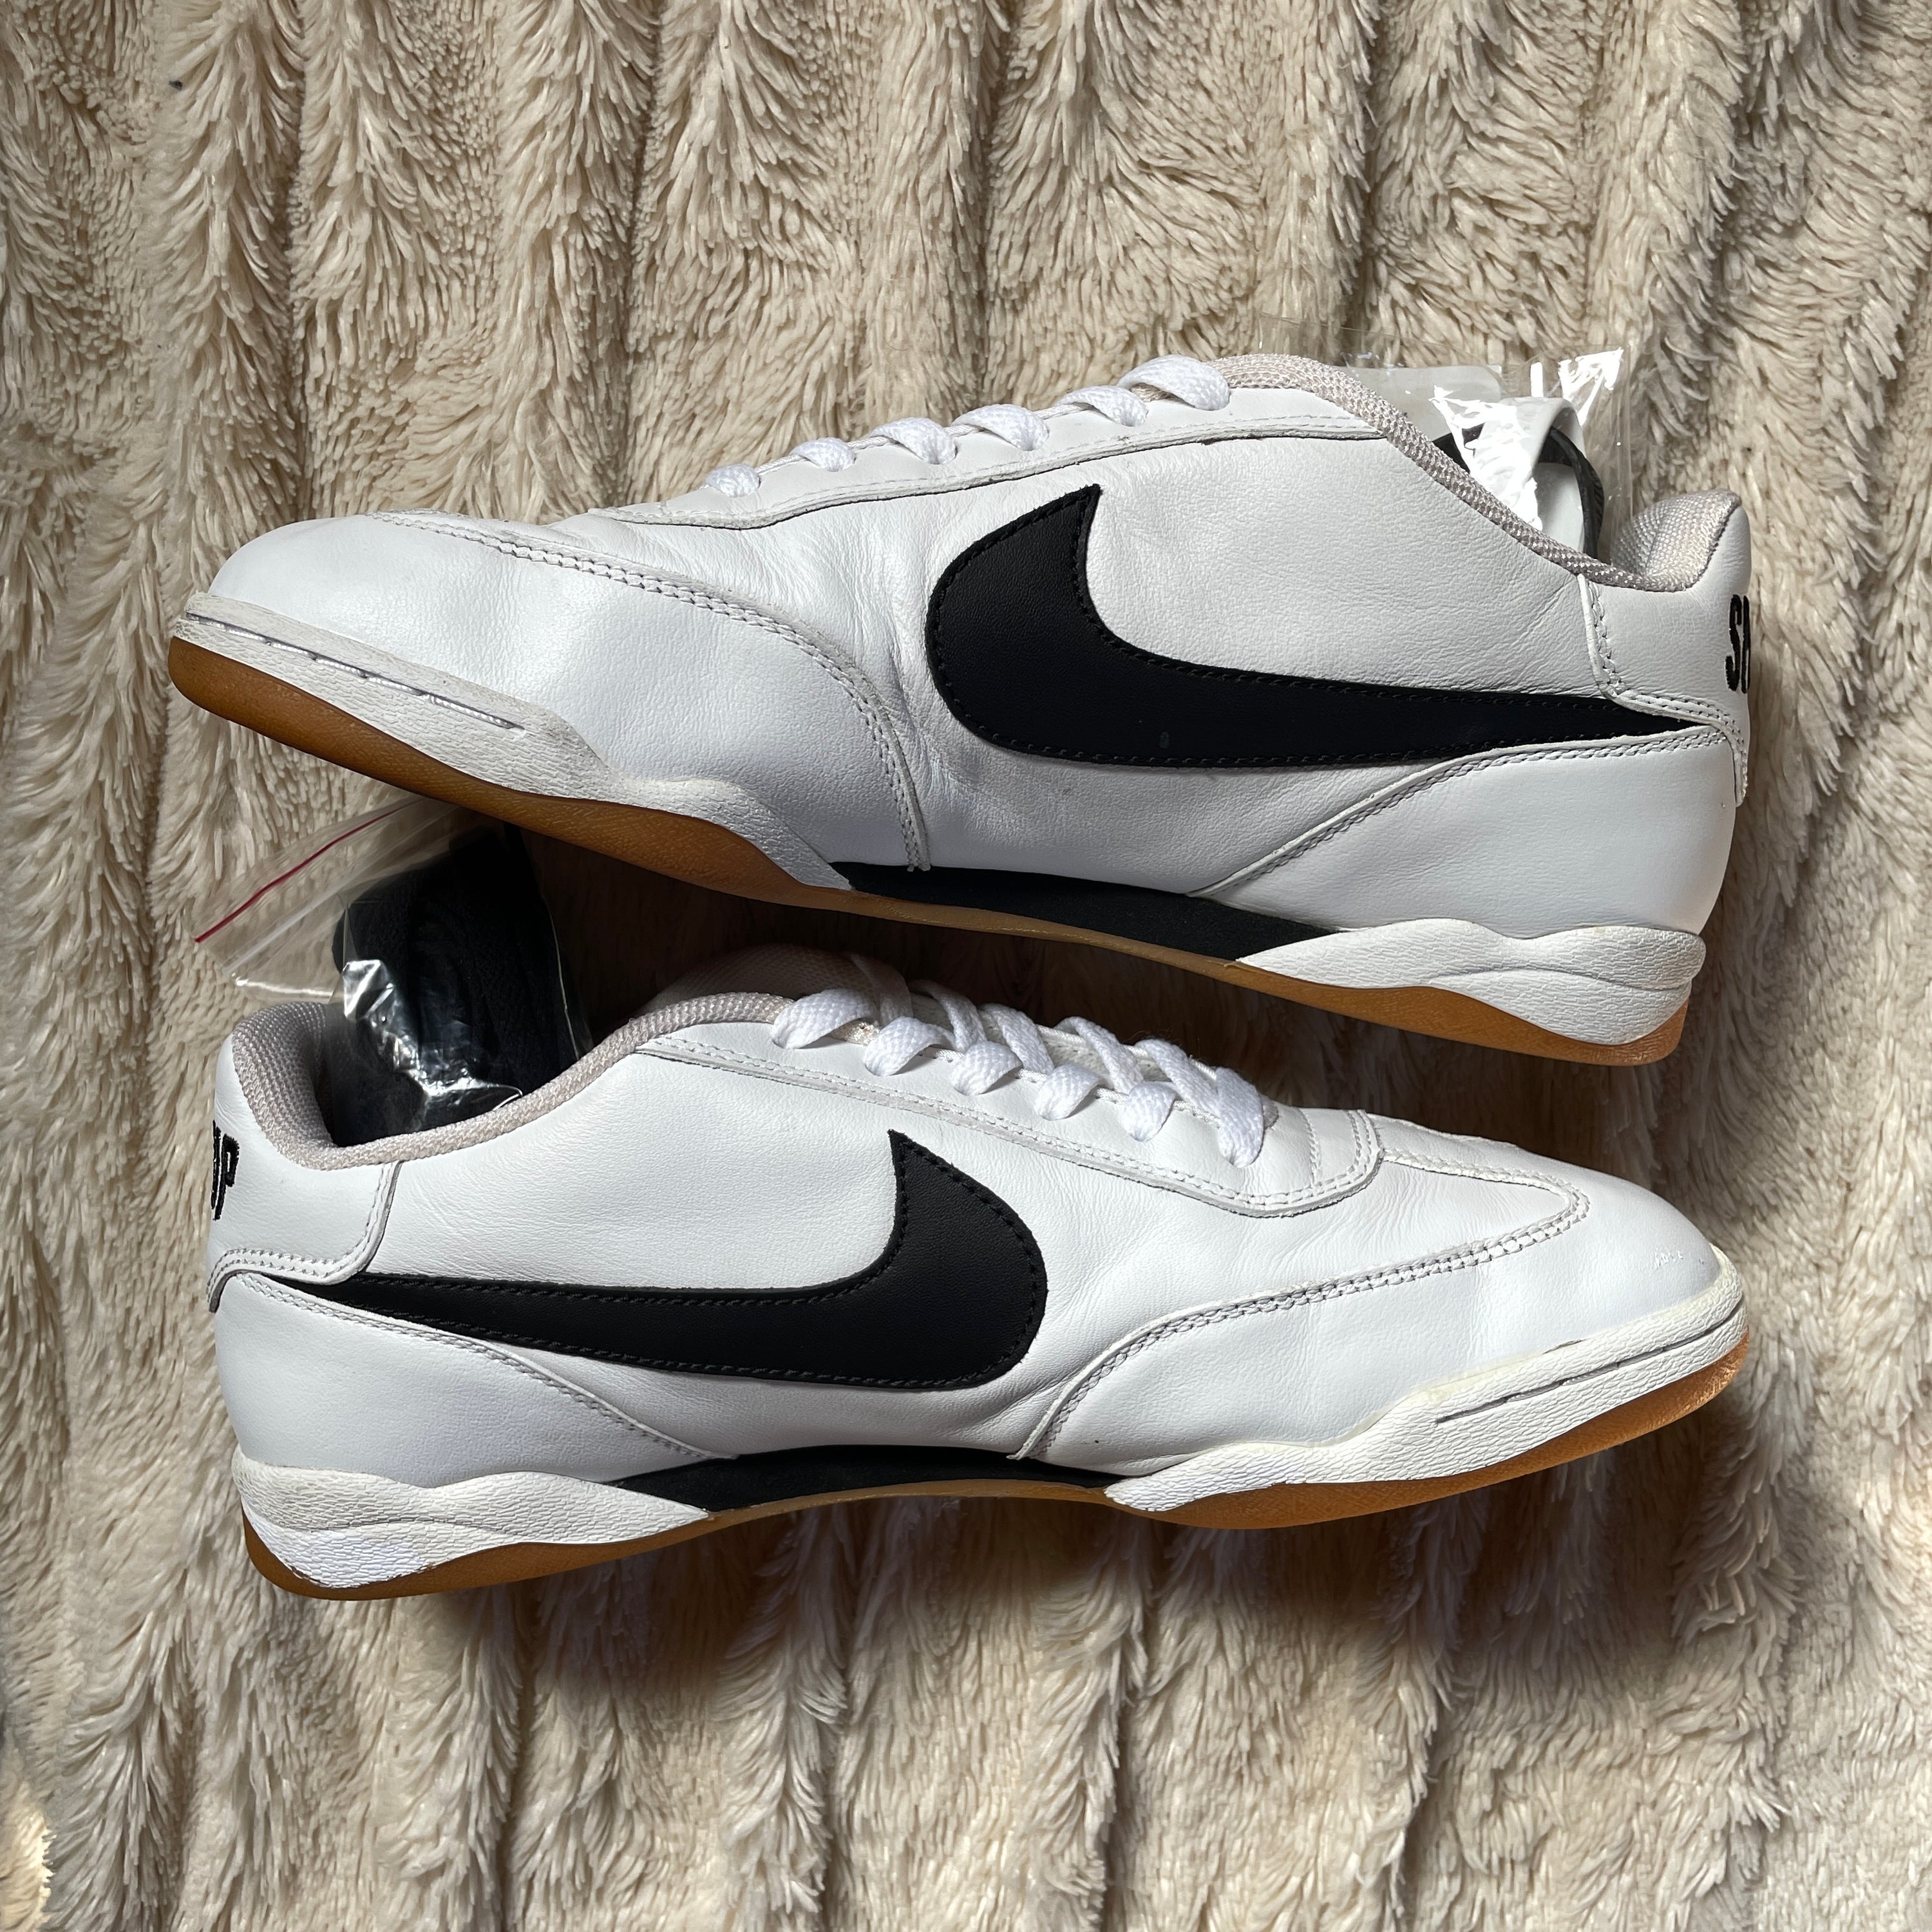 US 10 - NIKE AIR ZOOM FC "STAND UP SPEAK UP [2004]